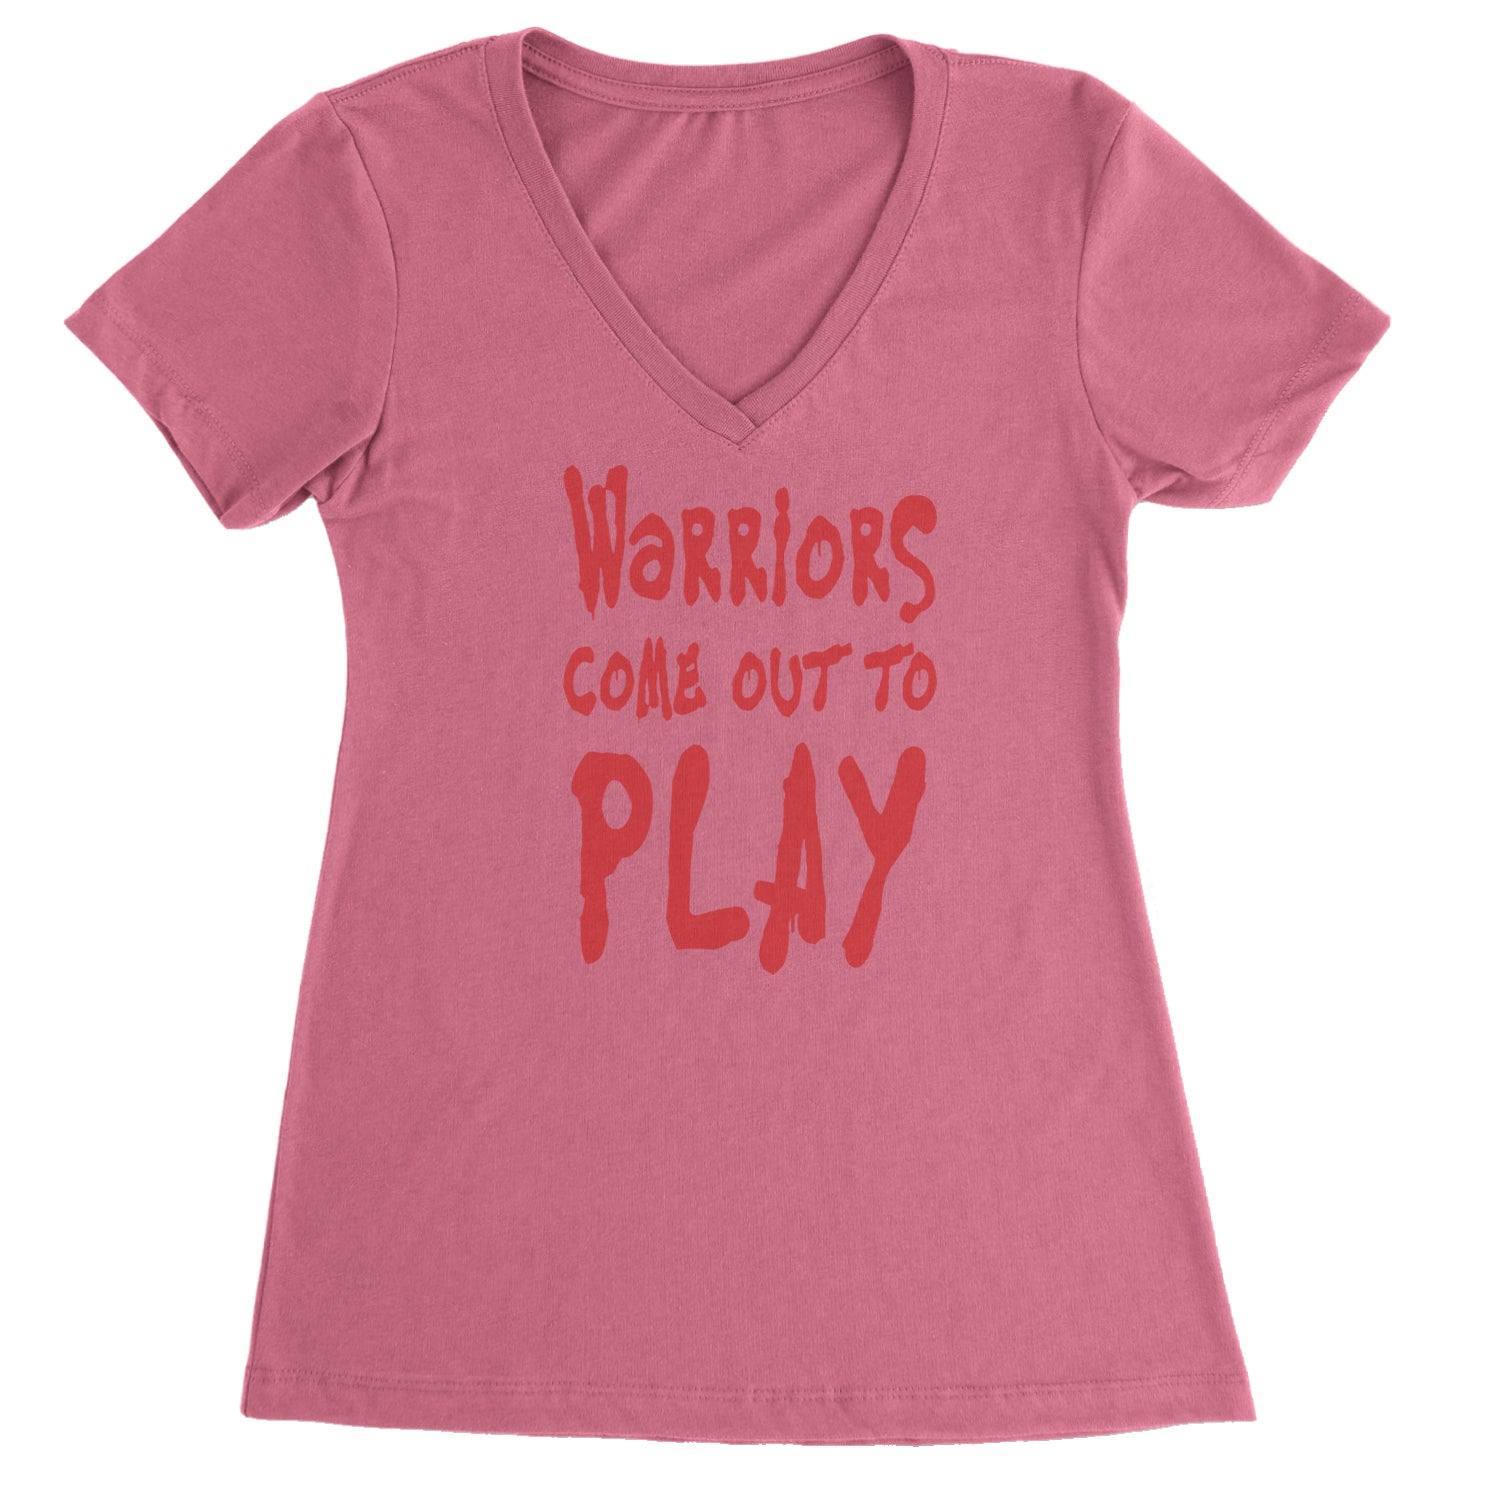 Warriors Come Out To Play  Ladies V-Neck T-shirt Hot Pink